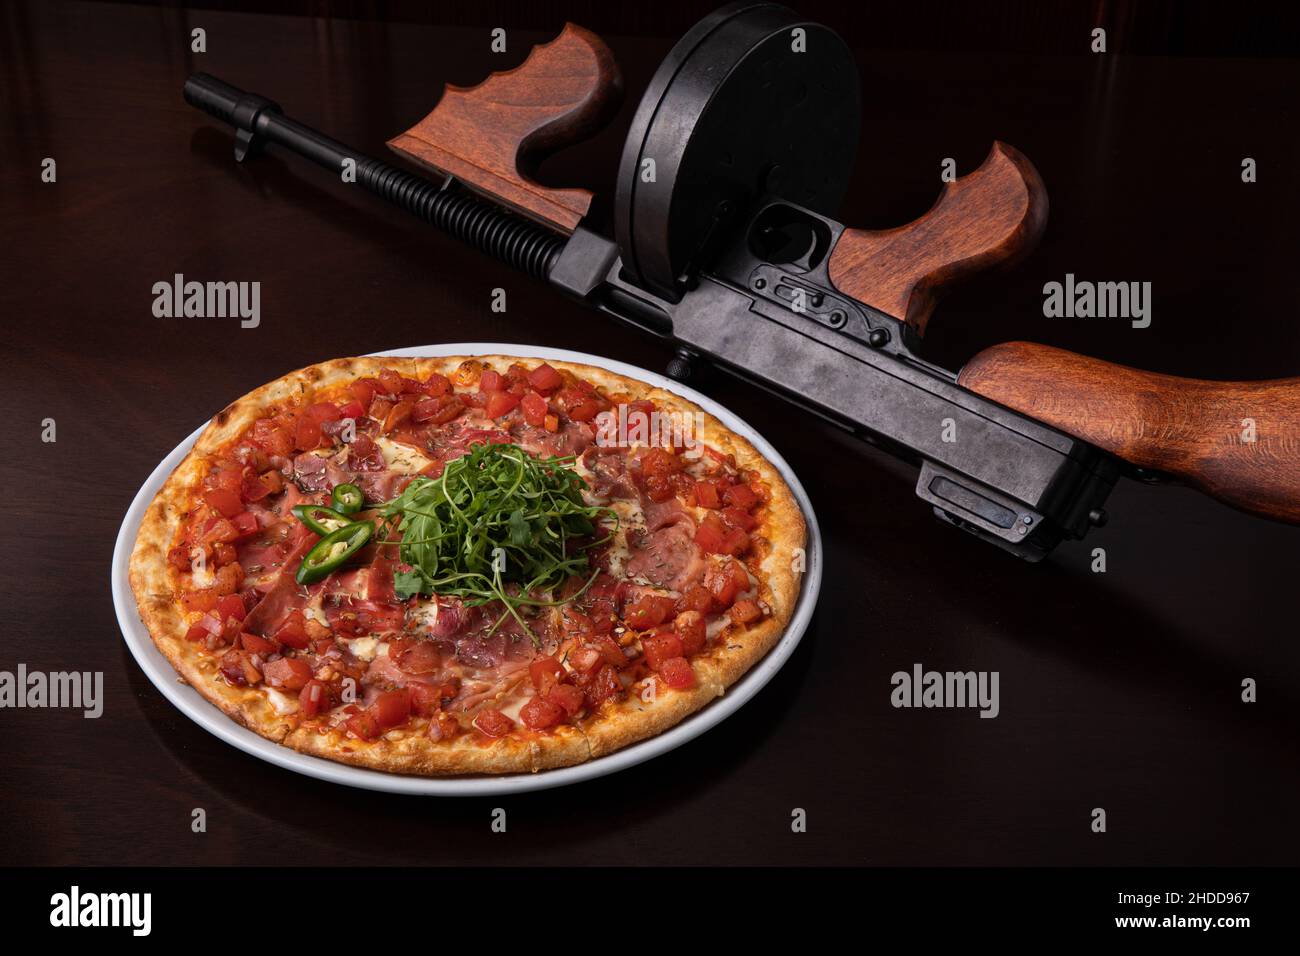 Thompson submachine gun on a dark brown table and a ham pizza with cheese  Stock Photo